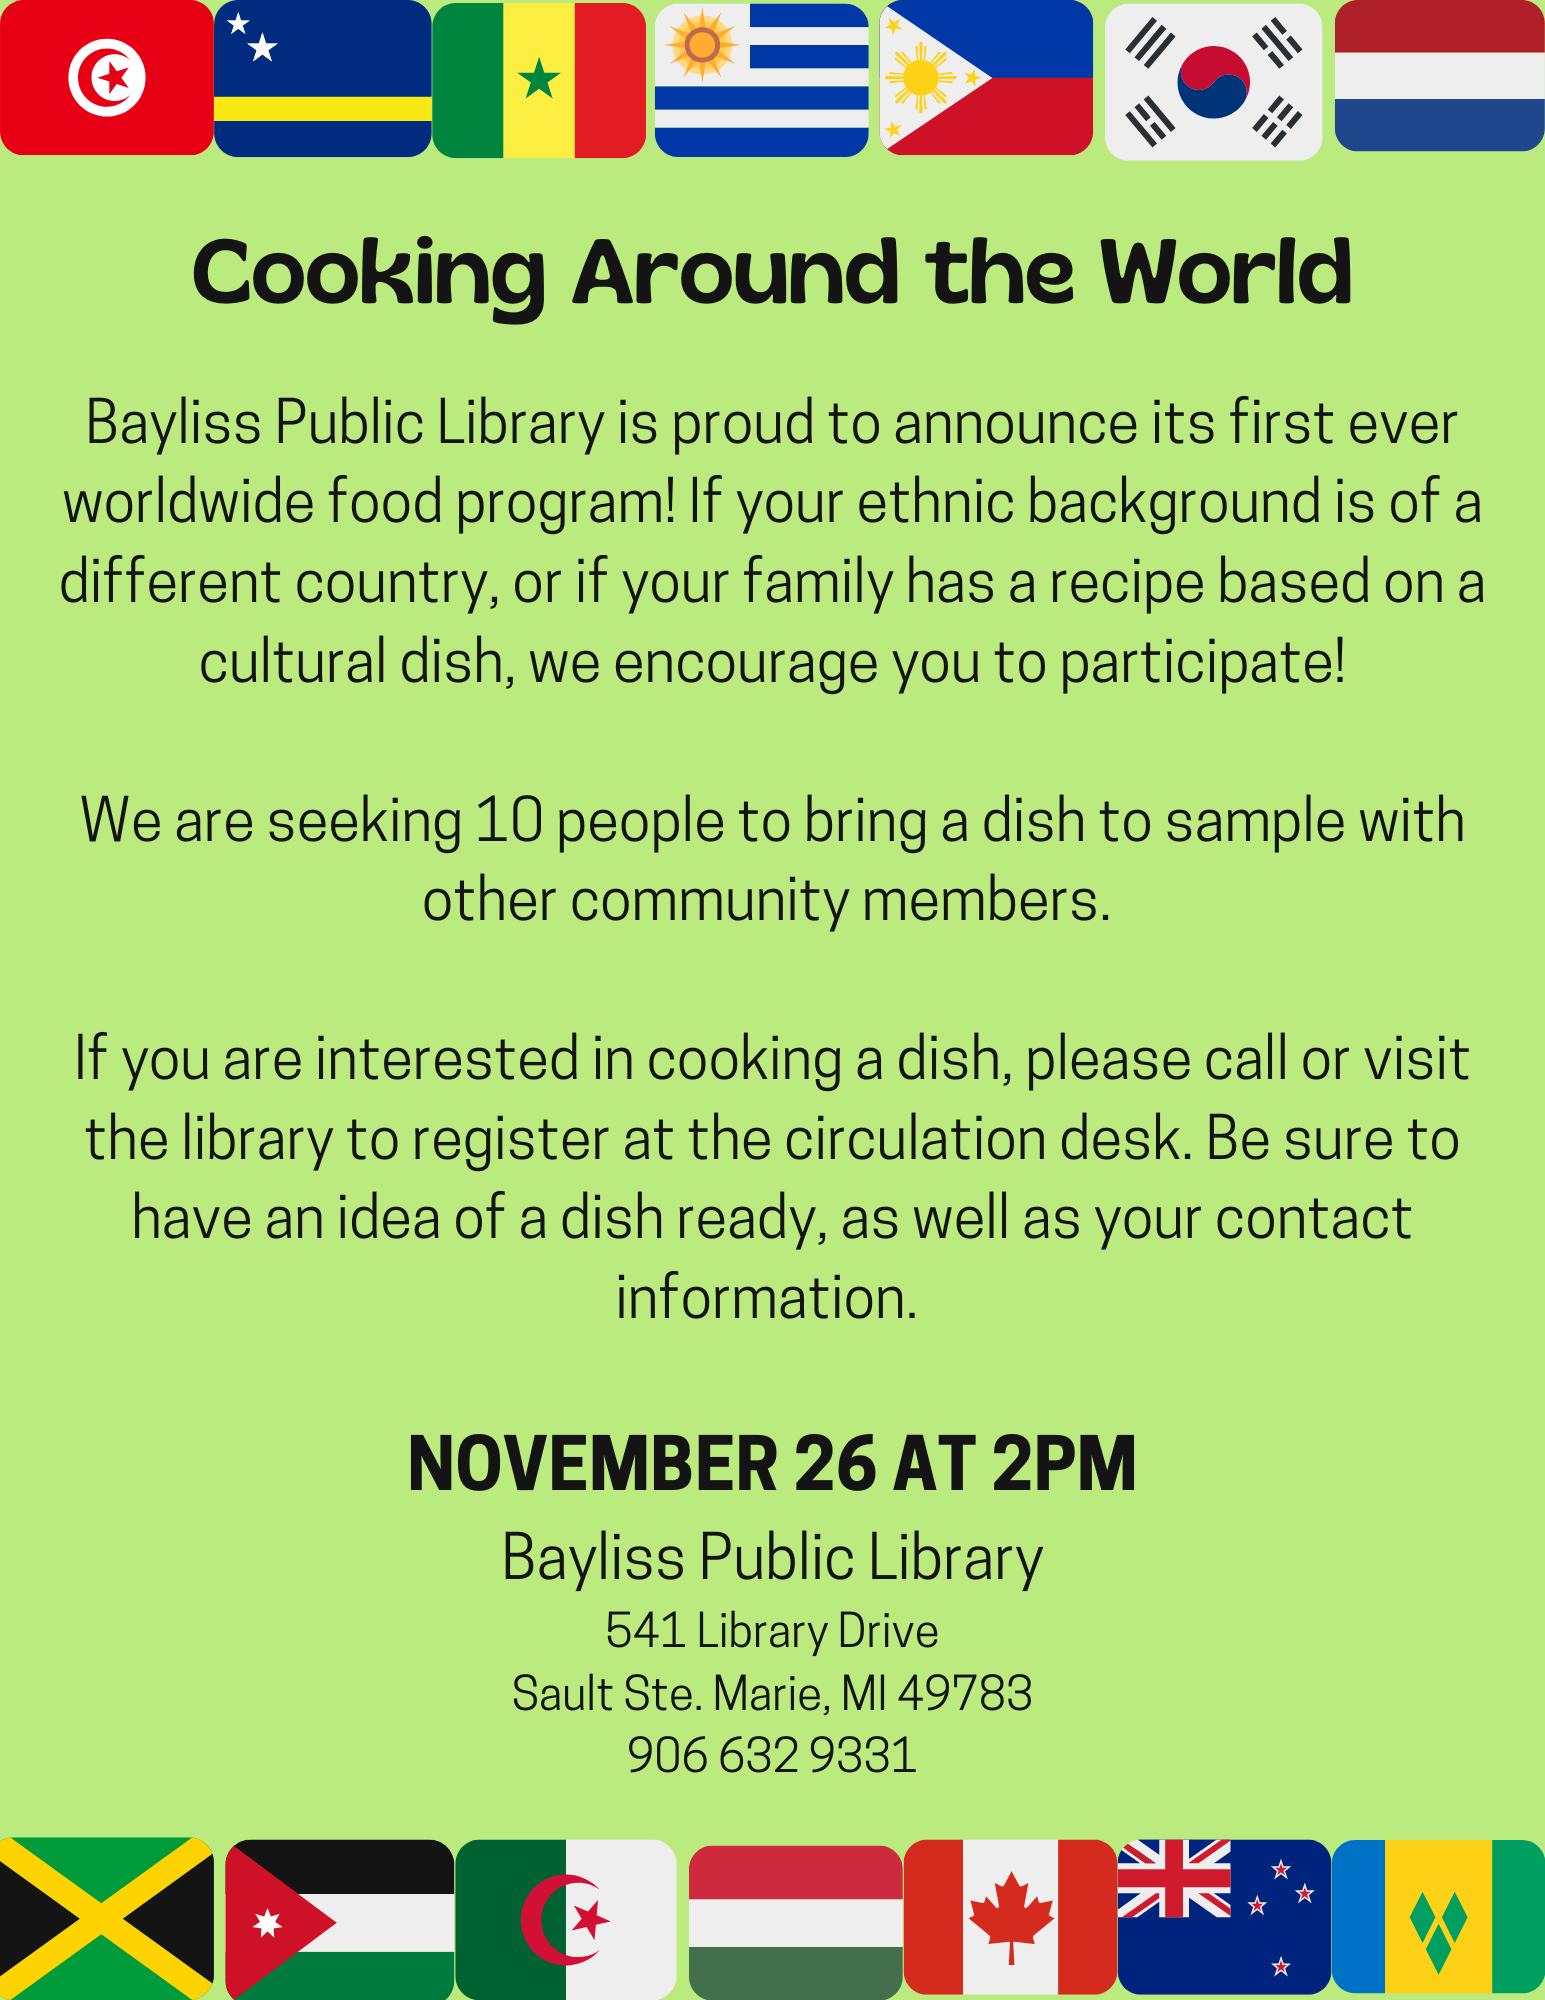 bayliss public library cooking around the world